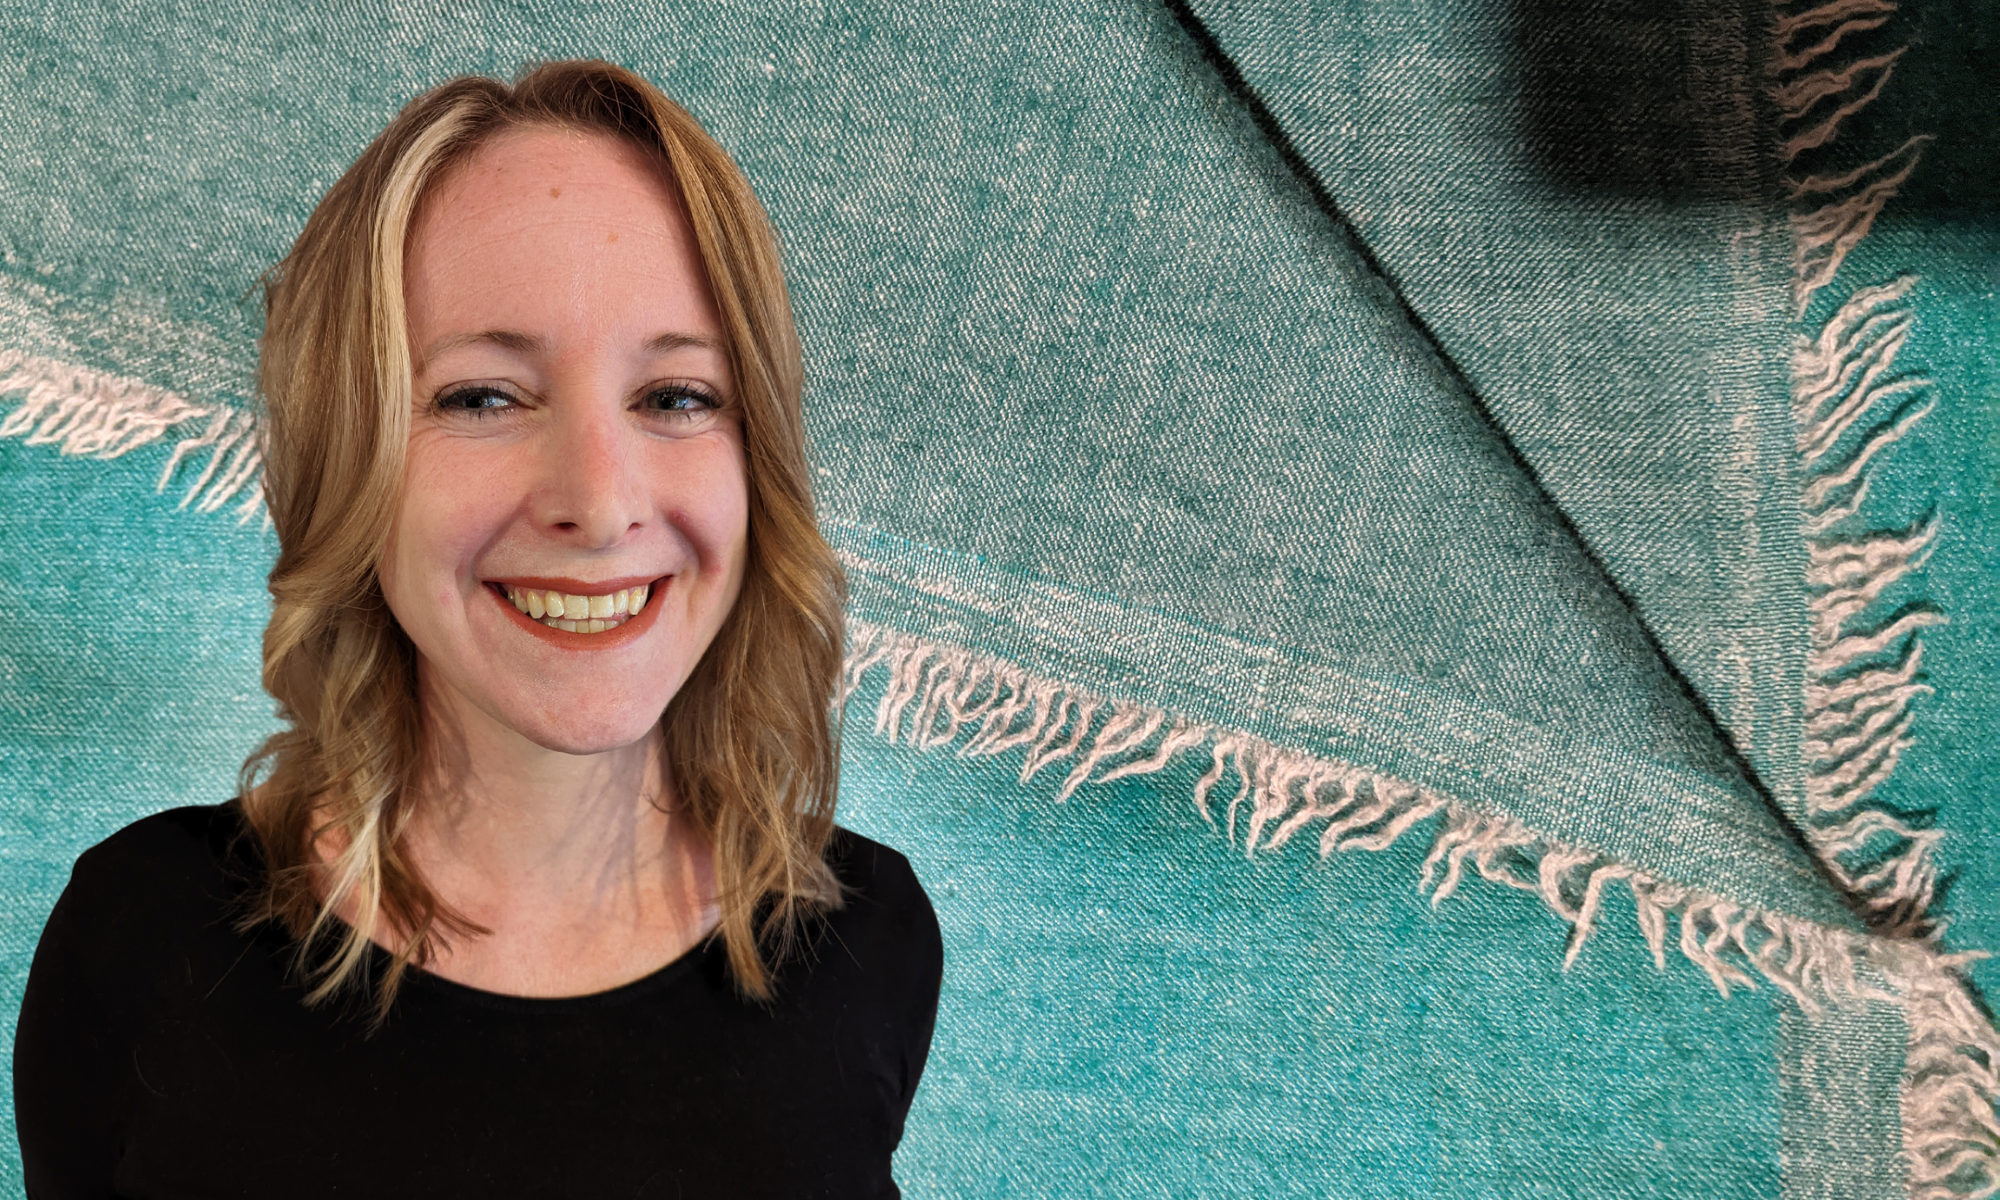 A photo of Heather Elisabeth Lanthorn smiling. She has medium length blonde hair with highlights and is wearing a black shirt. The background is a teal blanket textile.